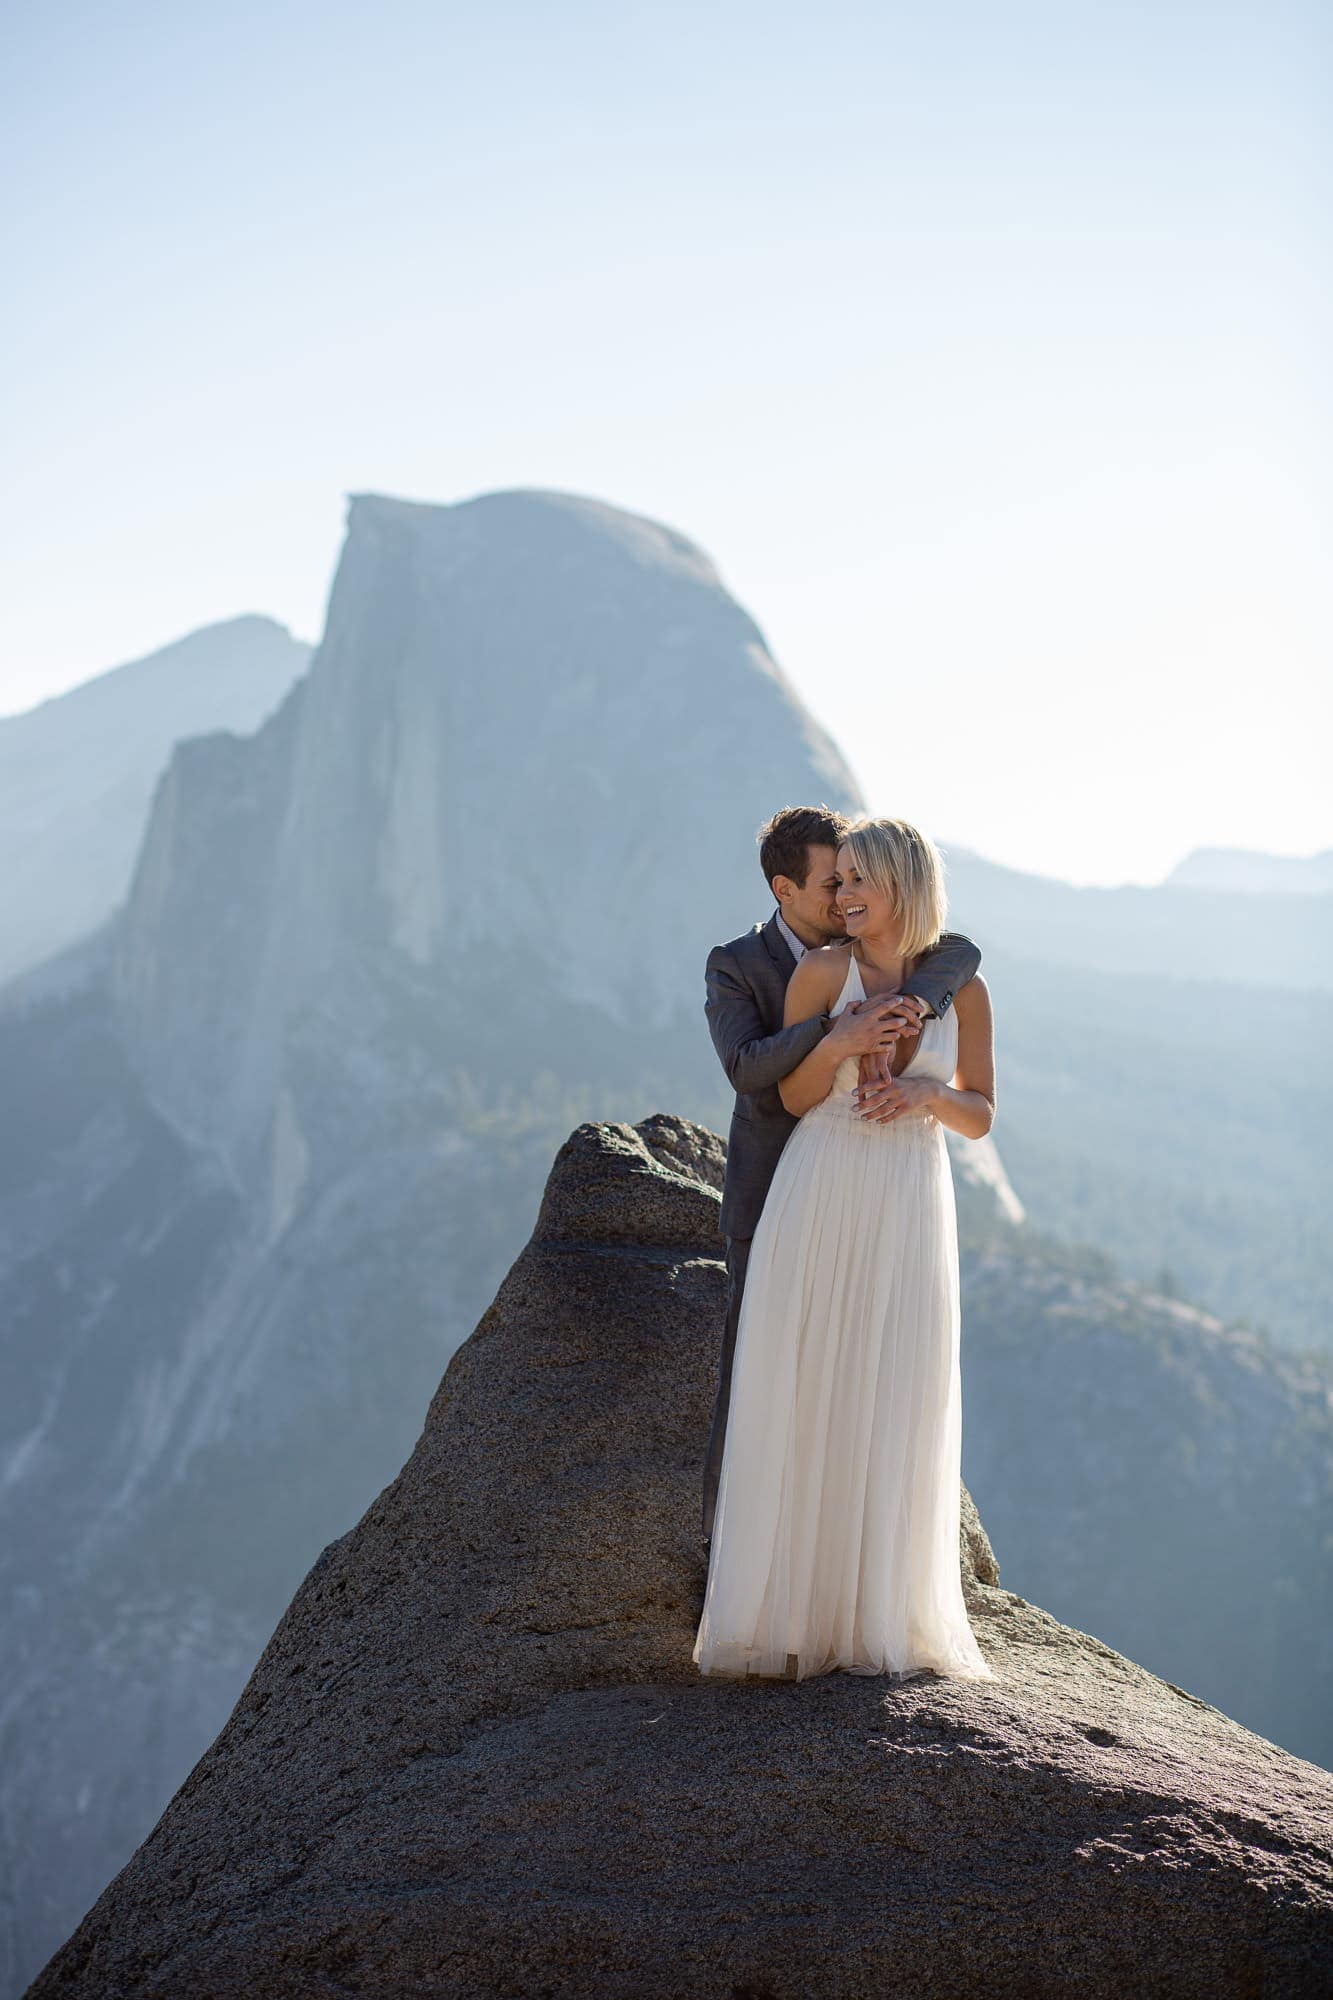 Adventure elopement portraits at sunrise at glacier point in Yosemite with Half Dome